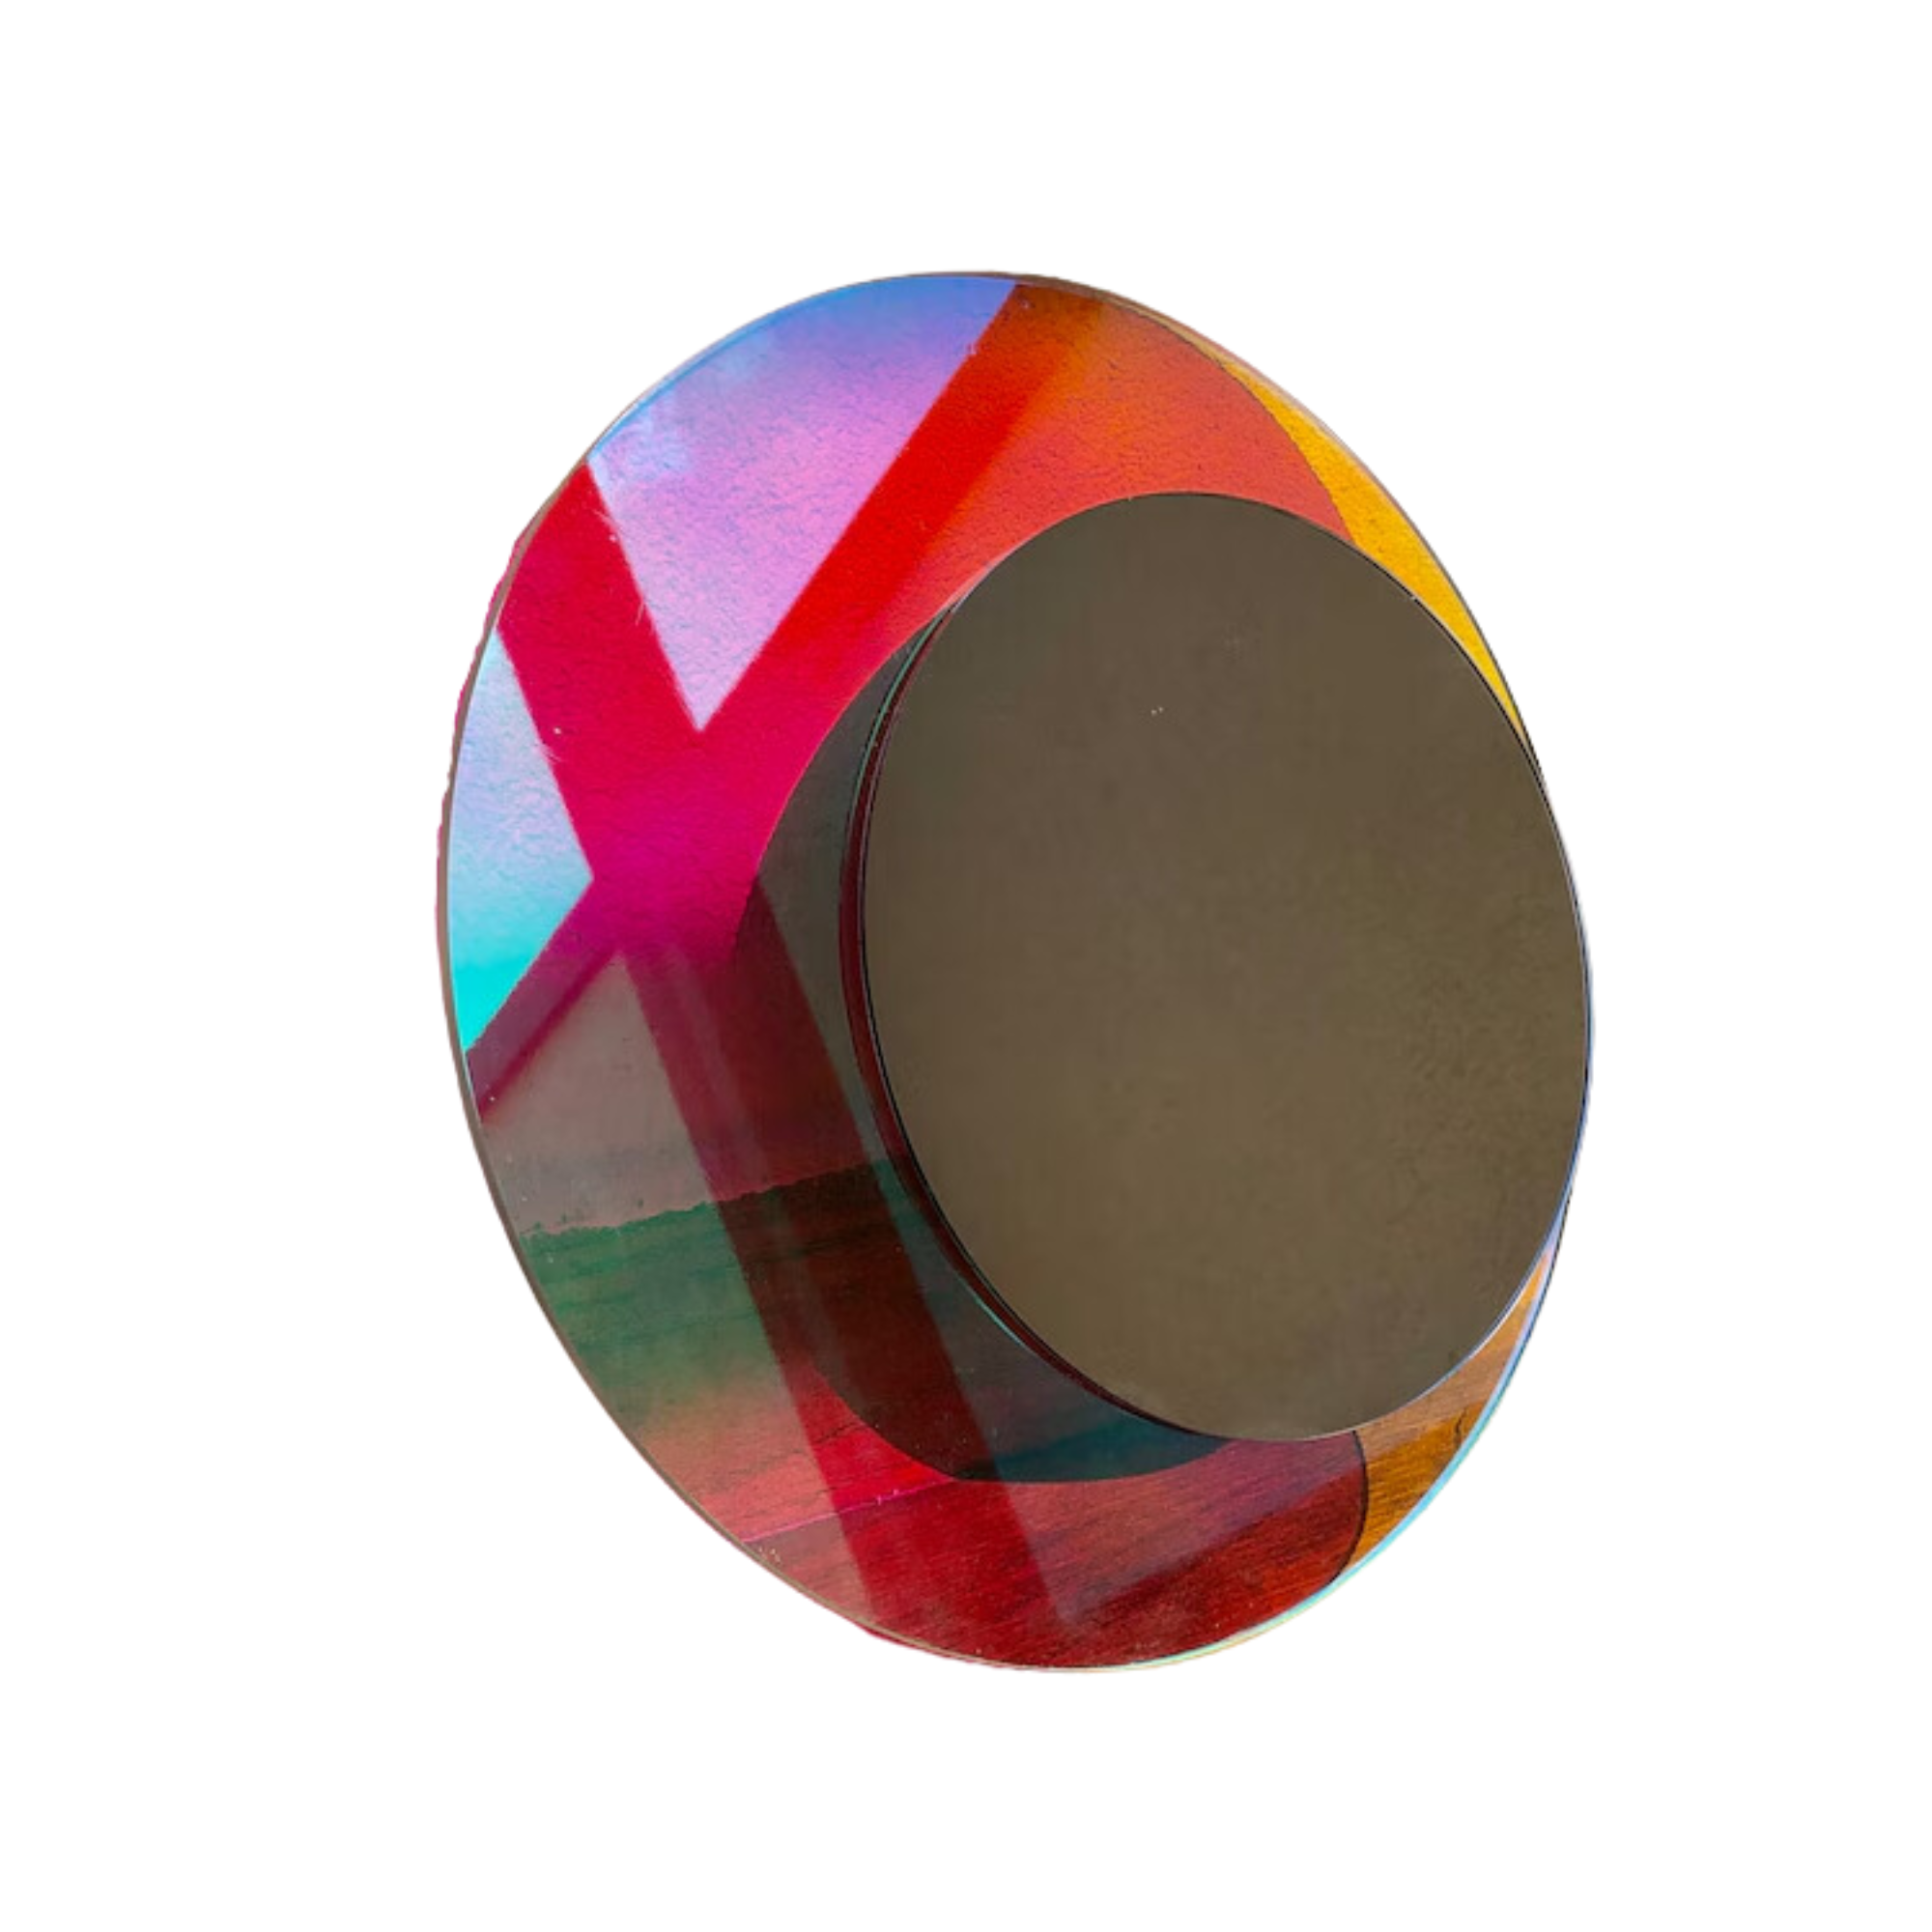 A rainbow reflective colored mirror